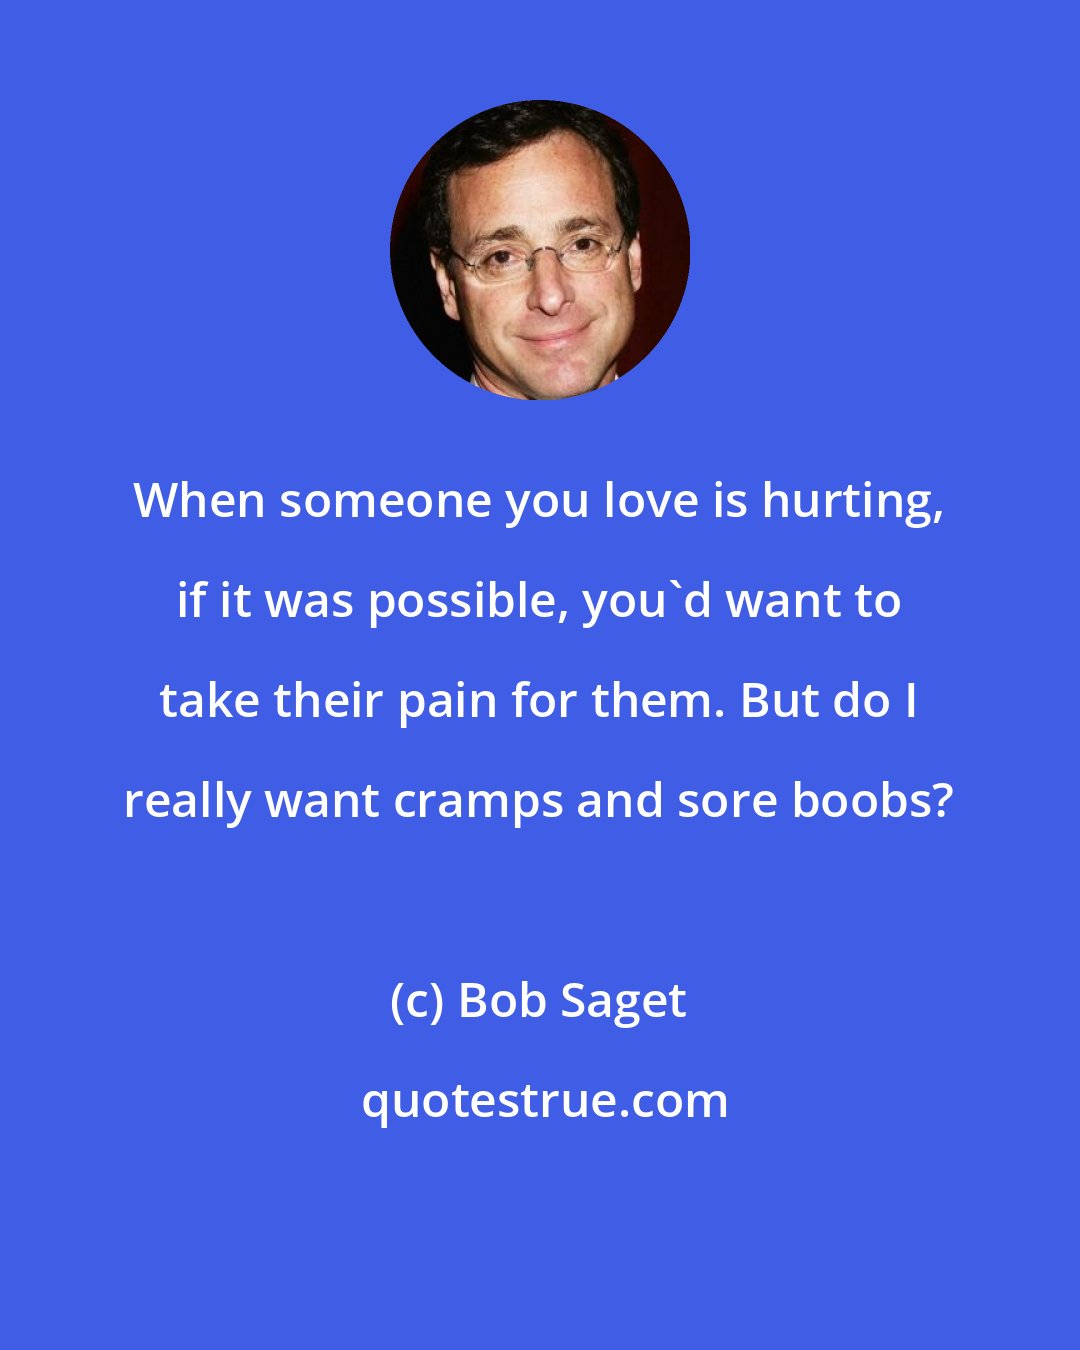 Bob Saget: When someone you love is hurting, if it was possible, you'd want to take their pain for them. But do I really want cramps and sore boobs?